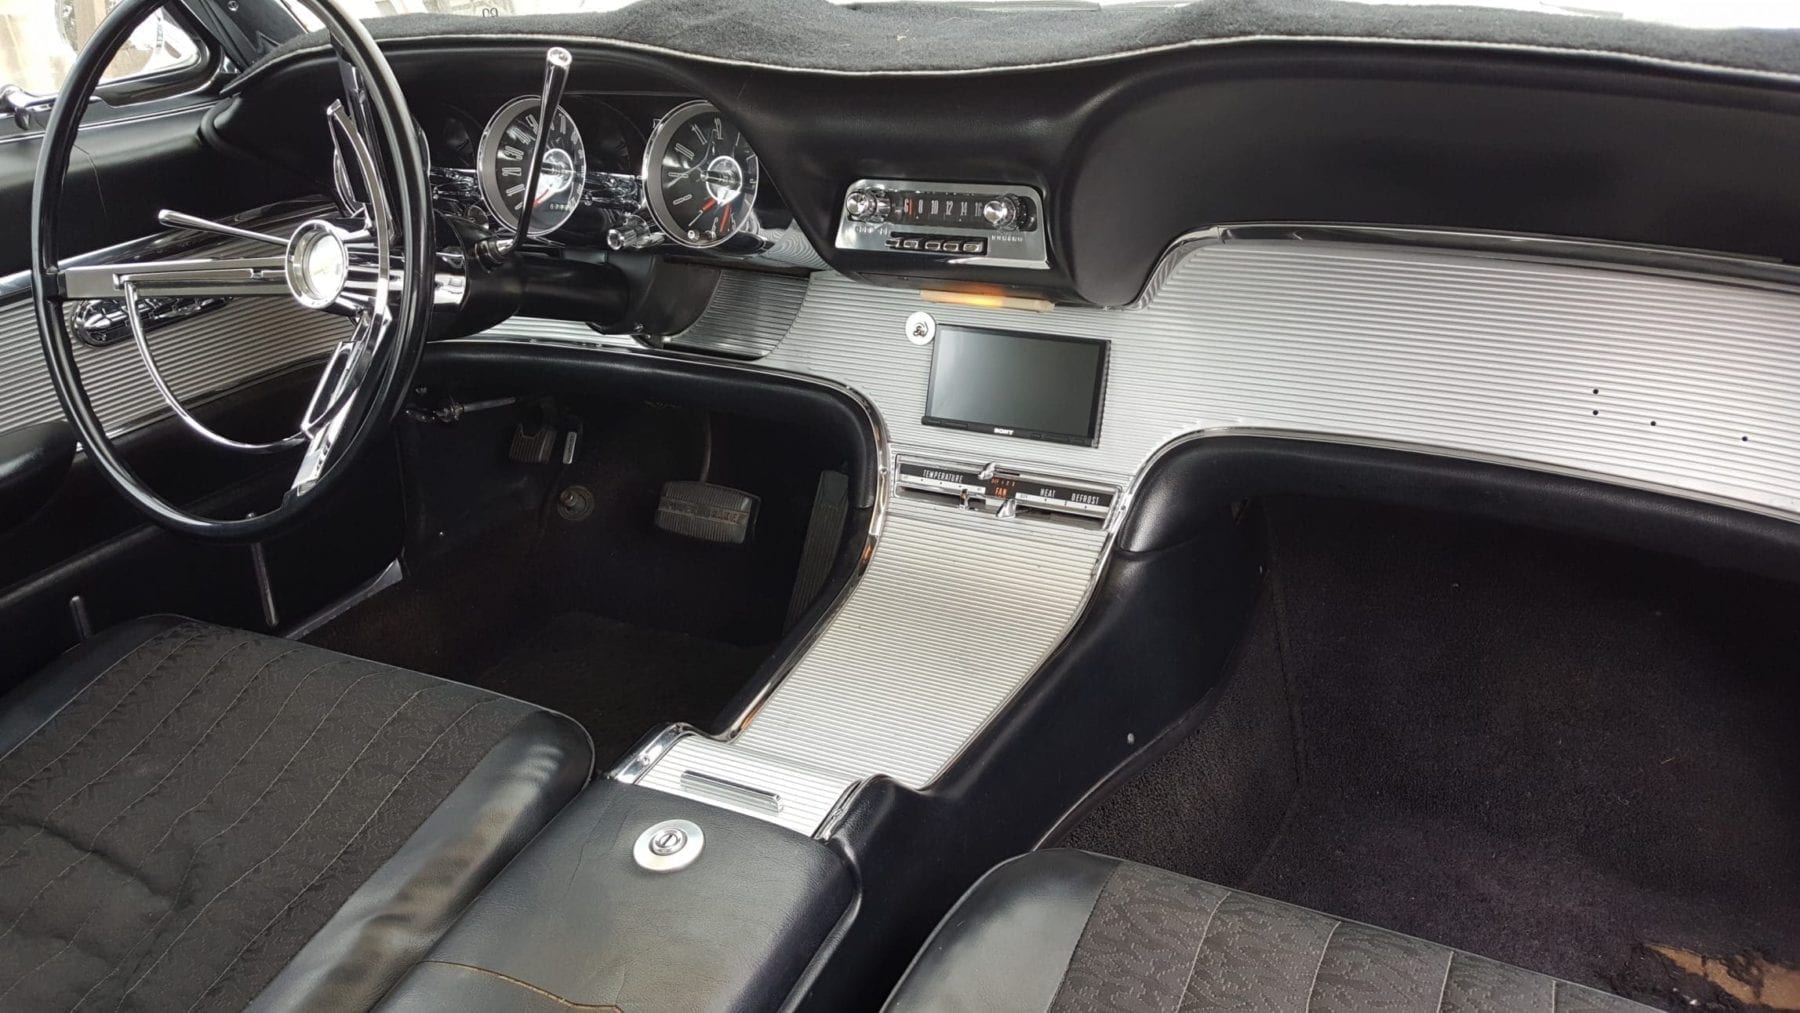 1962 TBird Dash with Double Din aftermarket head unit after installation